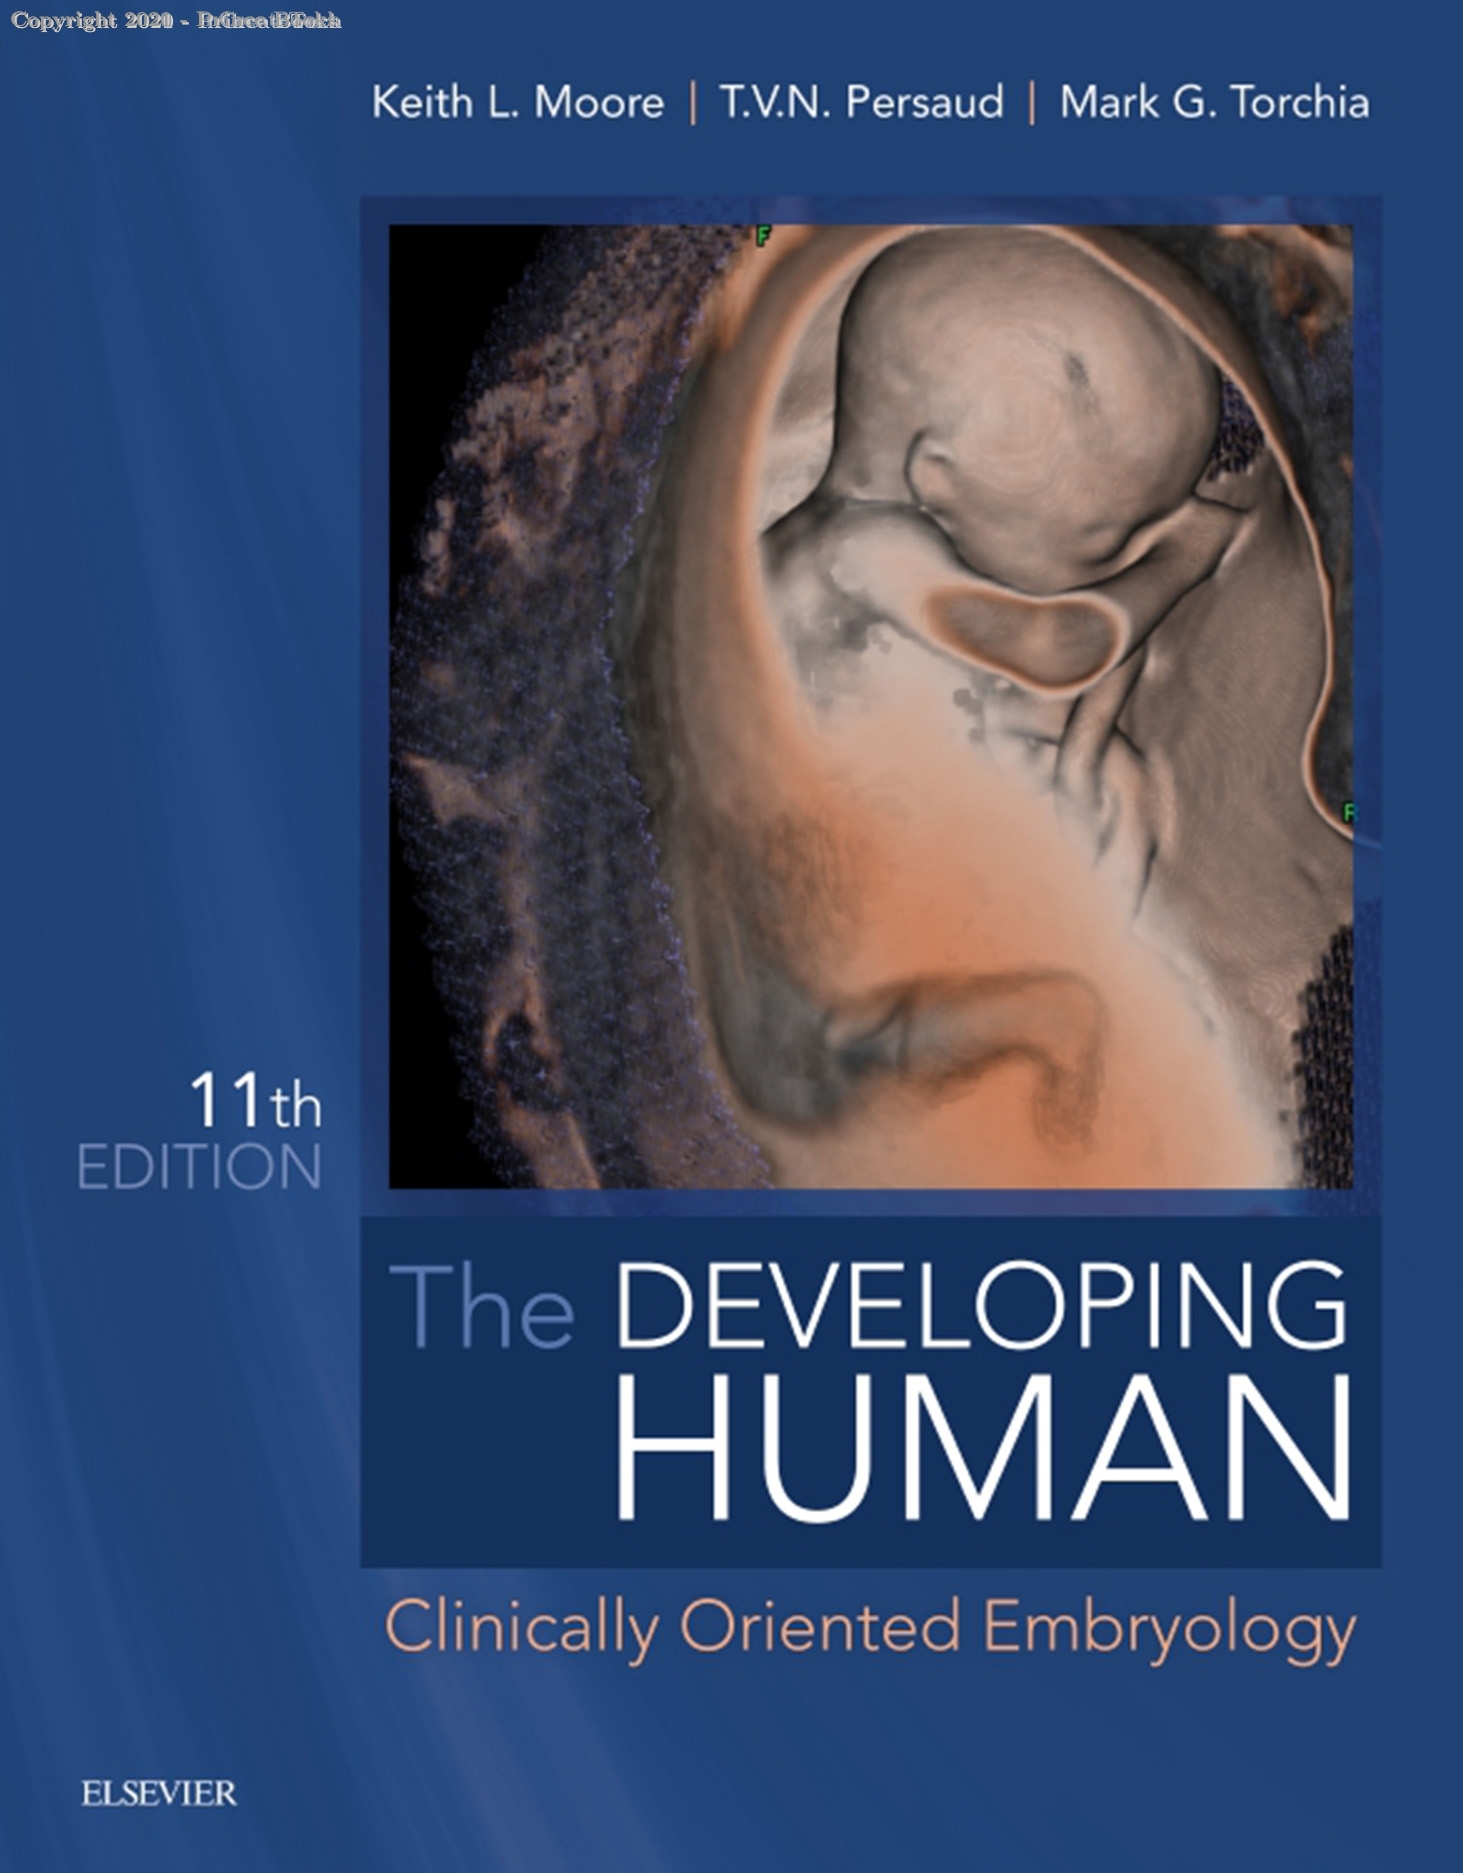 The Developing Human Clinically Oriented Embryology, 11e